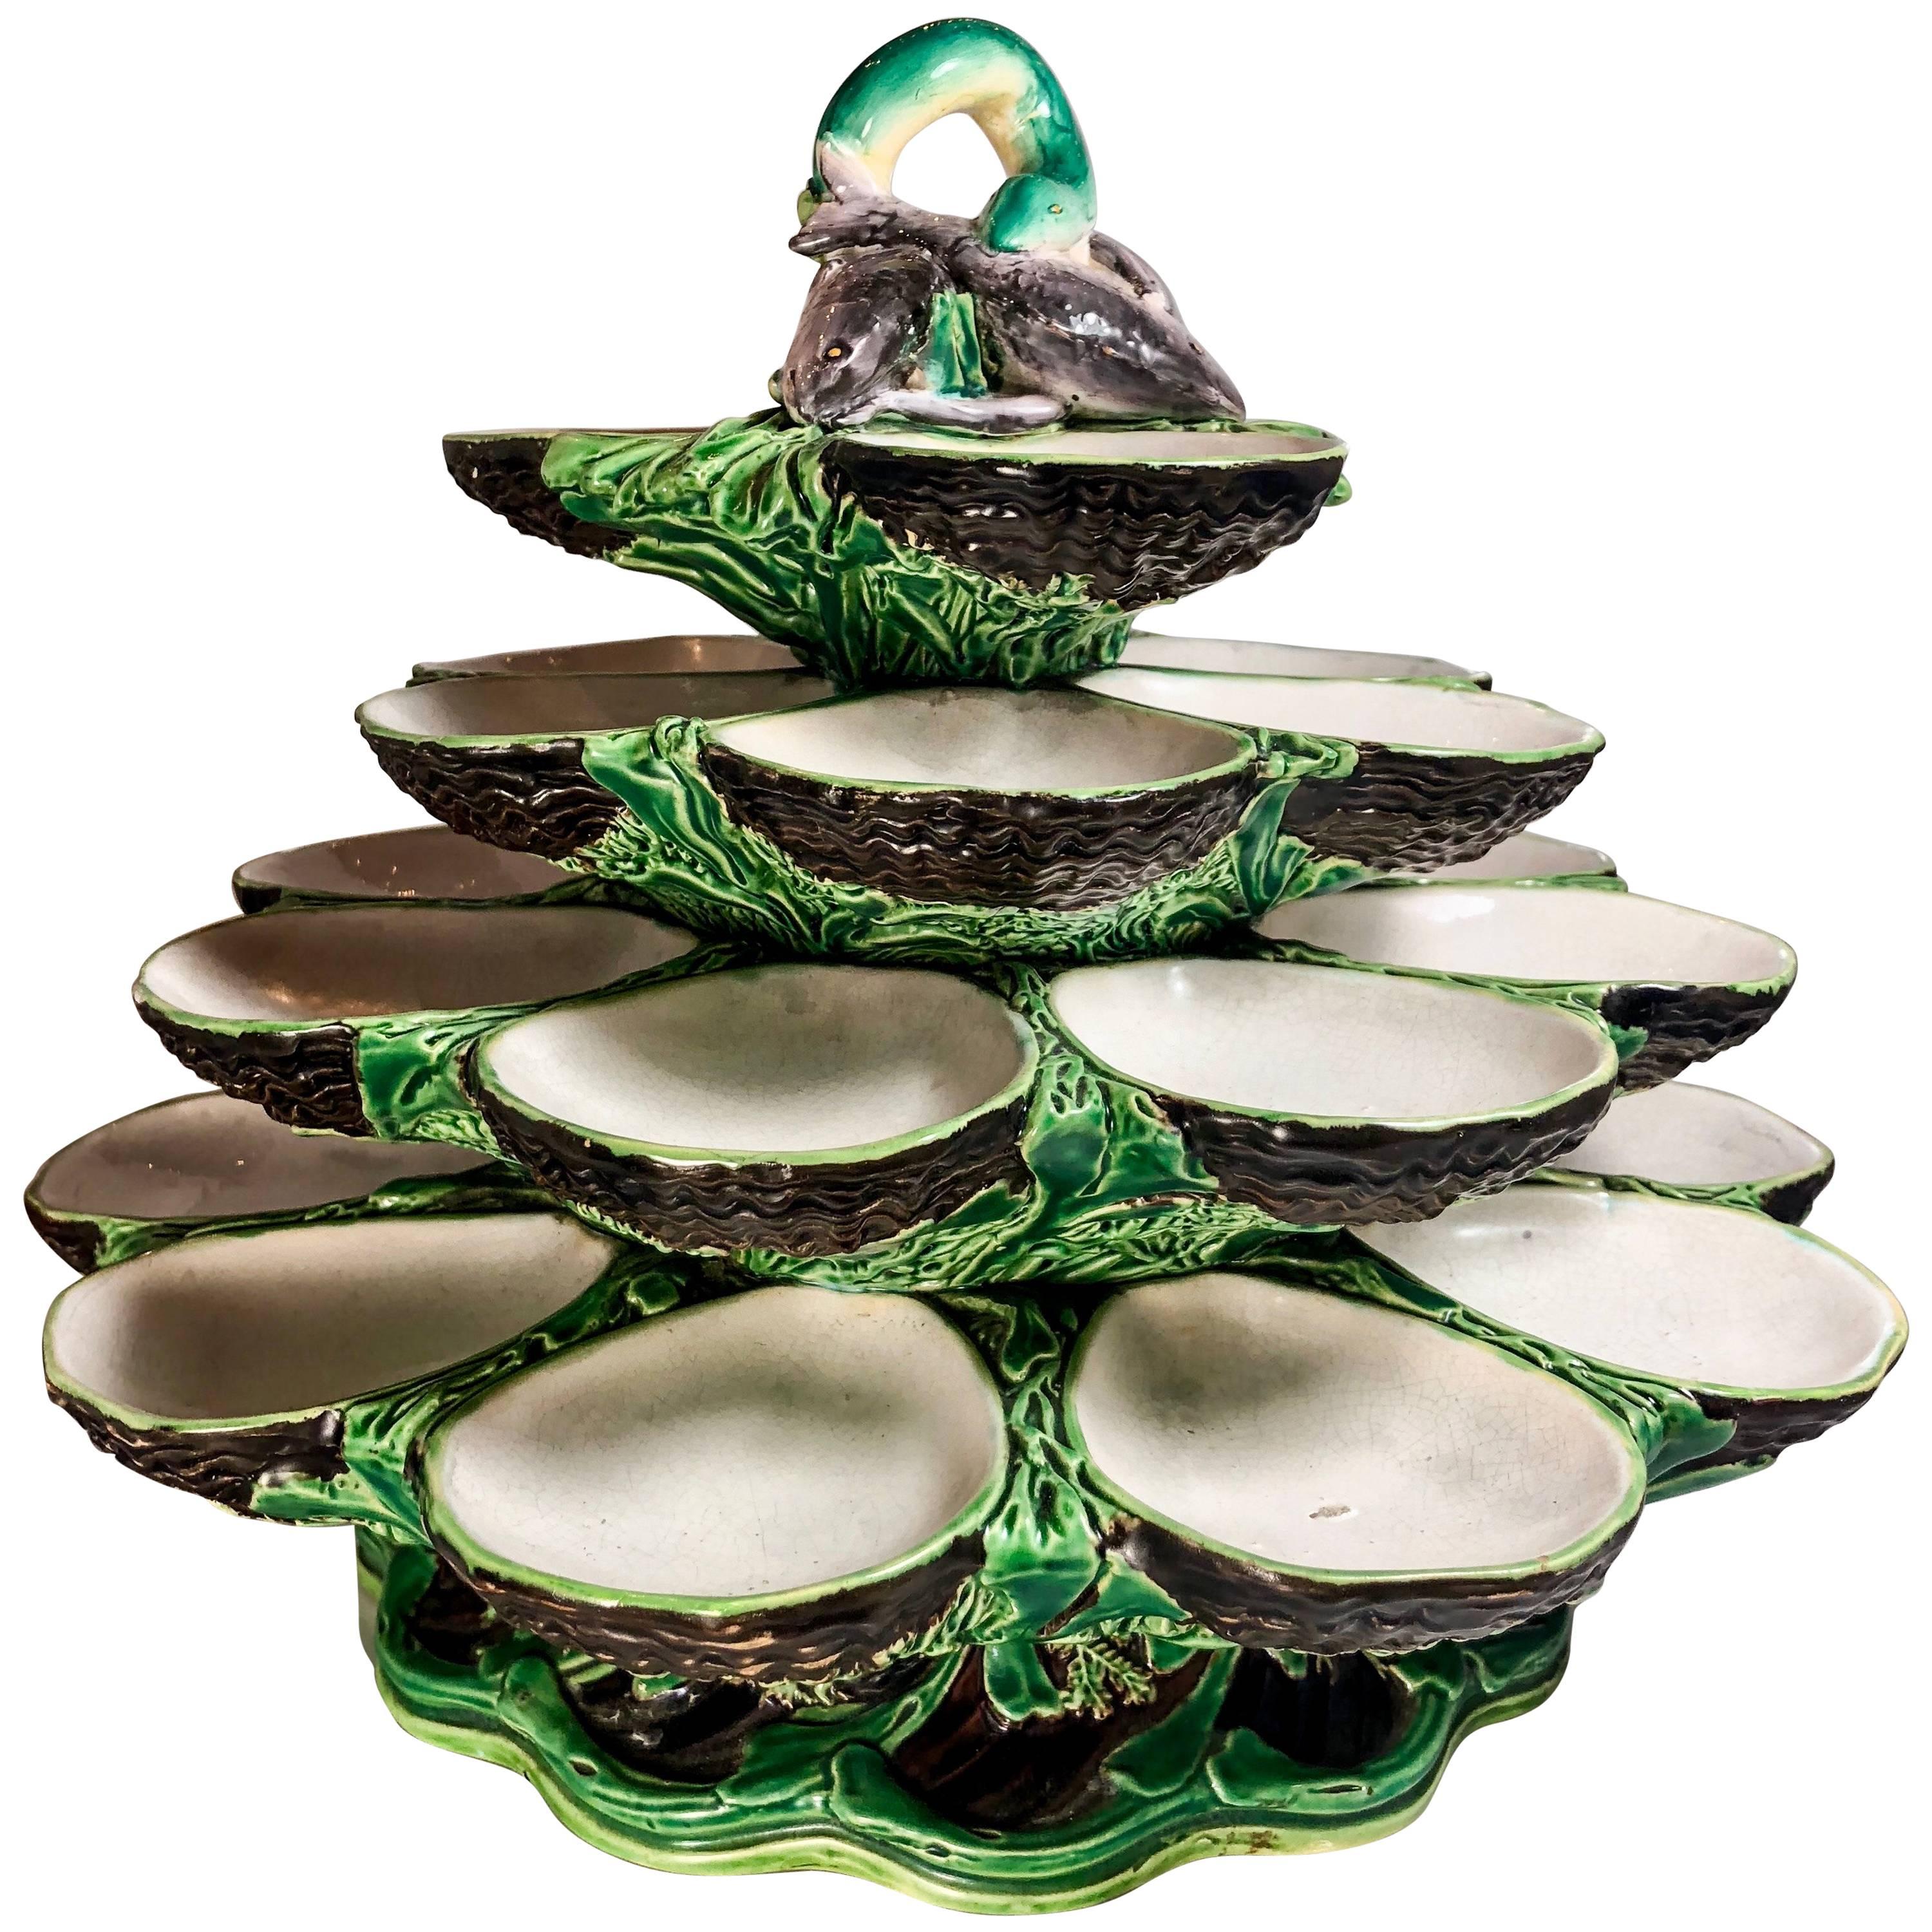 Revolving Four-Tiered Oyster Server Signed Minton Company, circa 1875